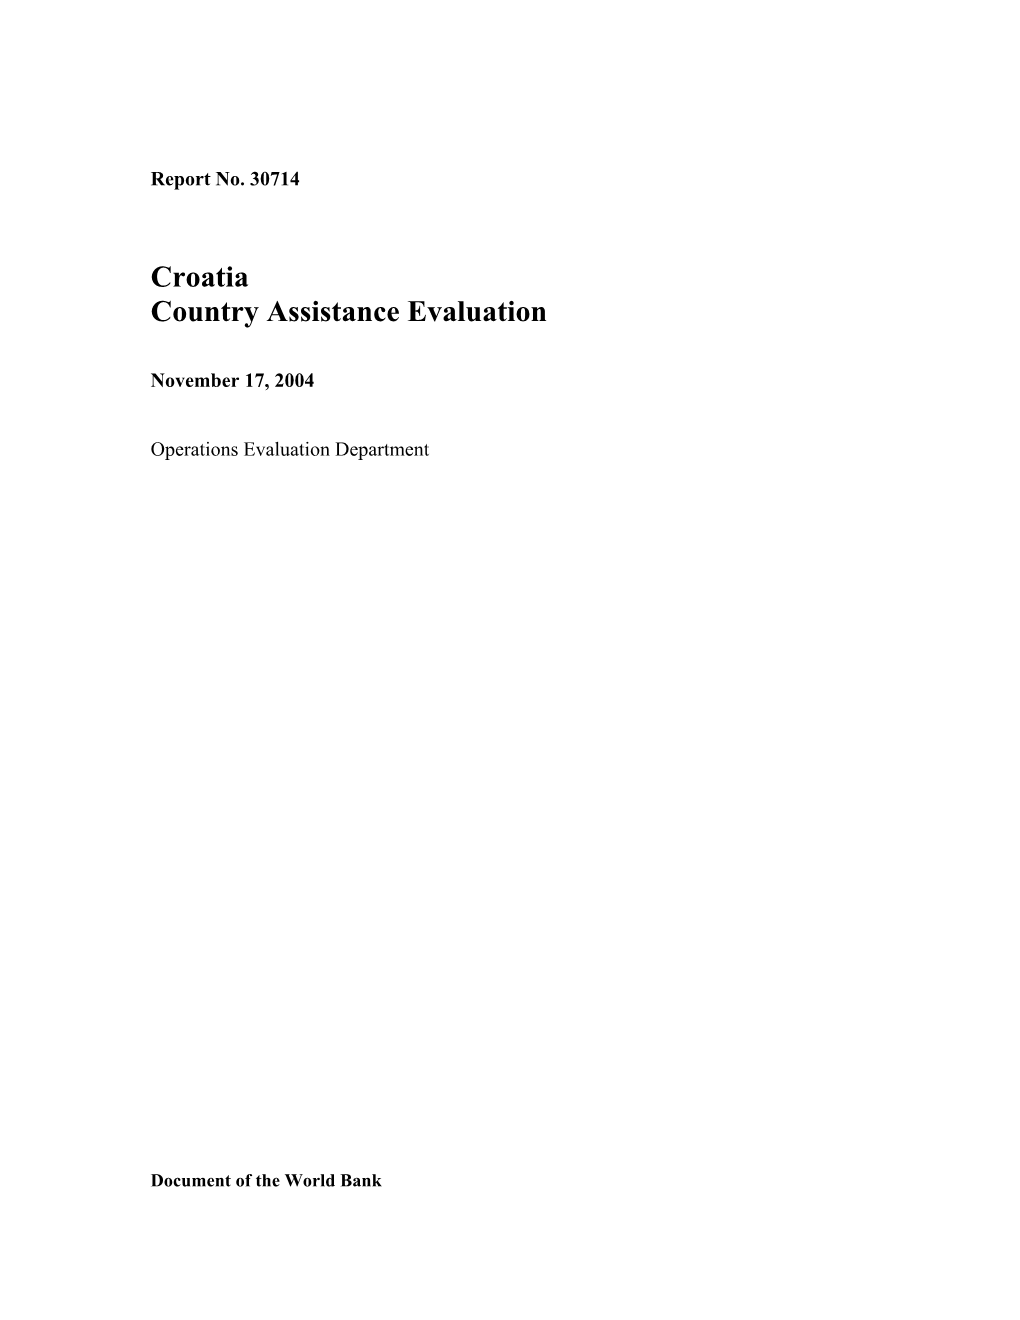 Croatia Country Assistance Evaluation